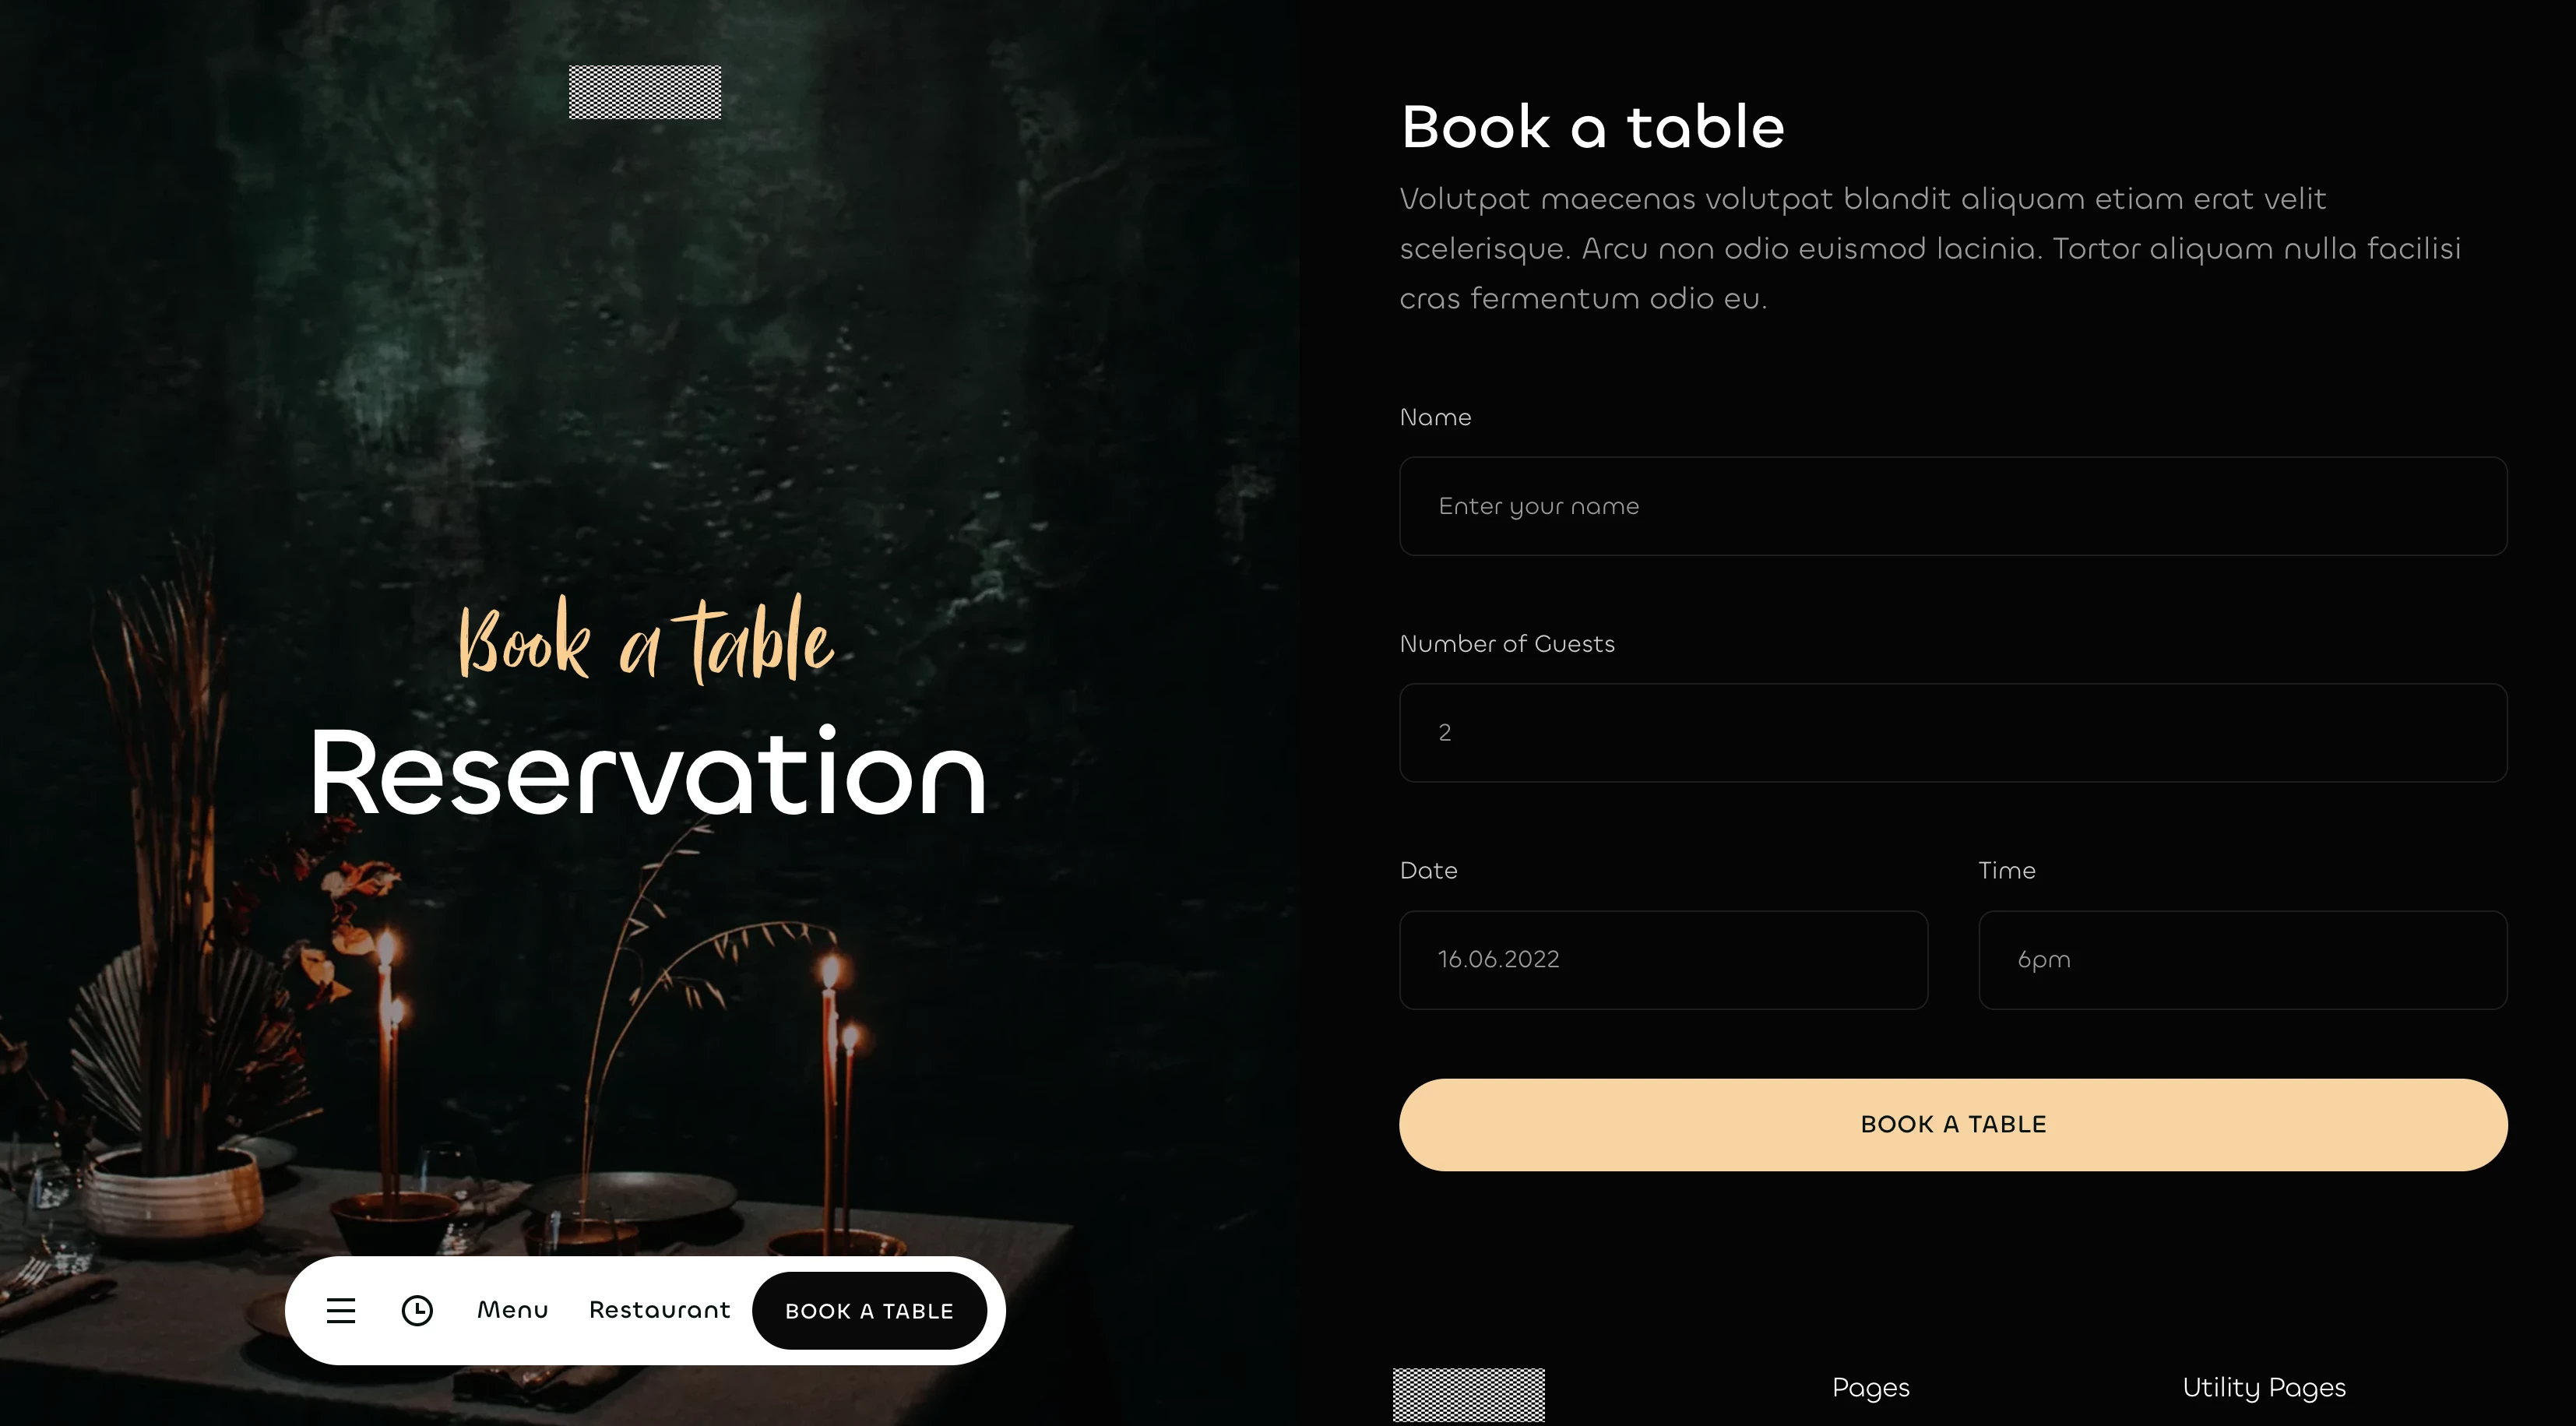 Restaurant B web site visual example part 3, reservation